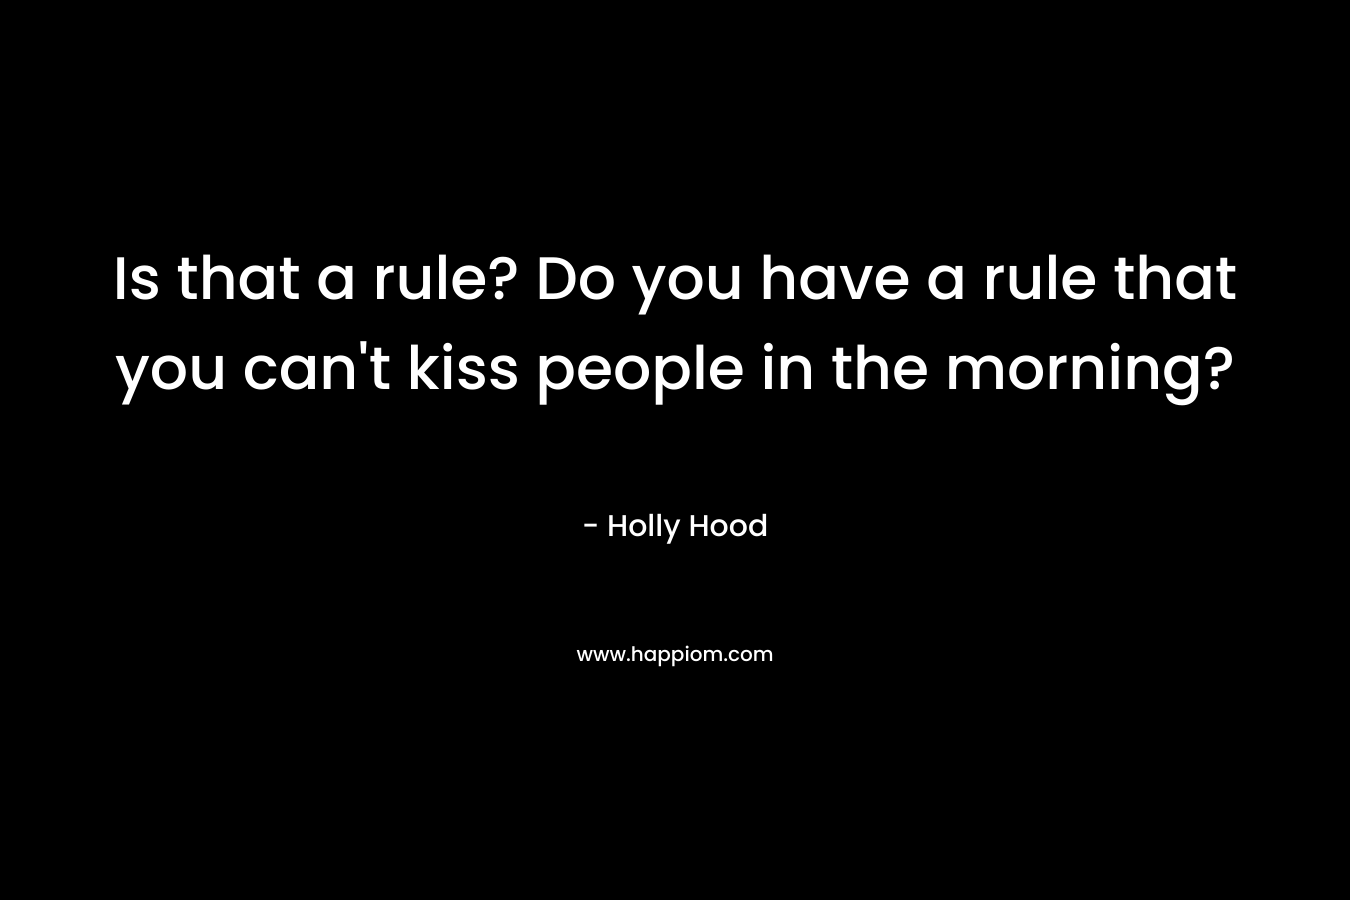 Is that a rule? Do you have a rule that you can’t kiss people in the morning? – Holly Hood